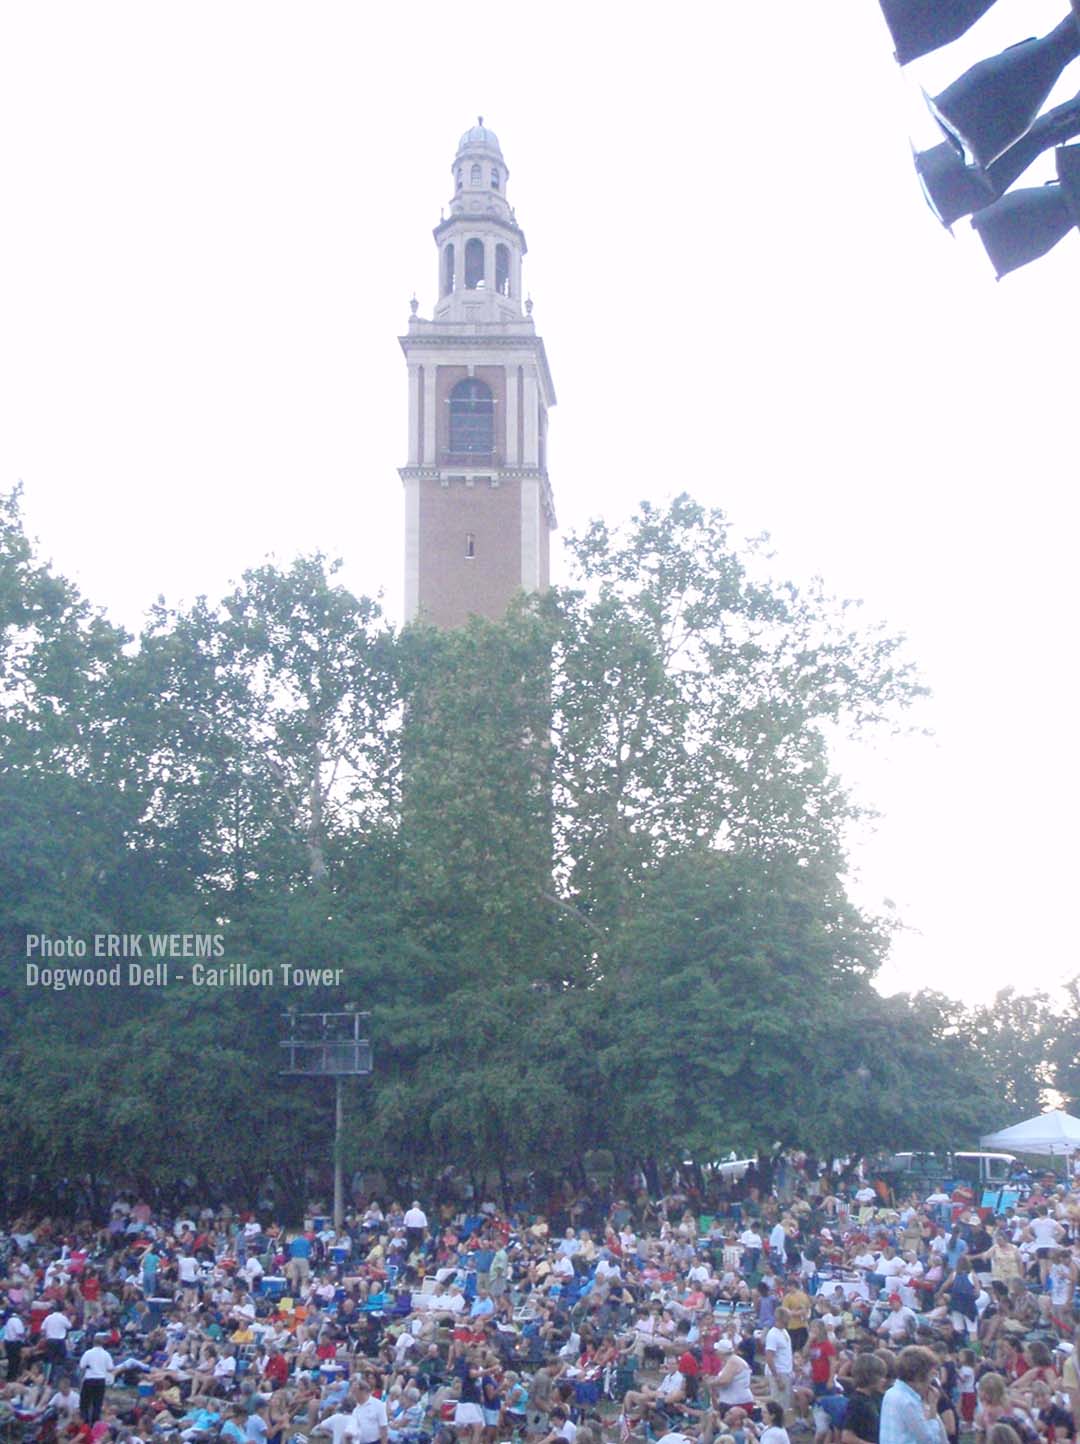 July 2010 Dogwood Dell Carillon Tower July 4th Crowd